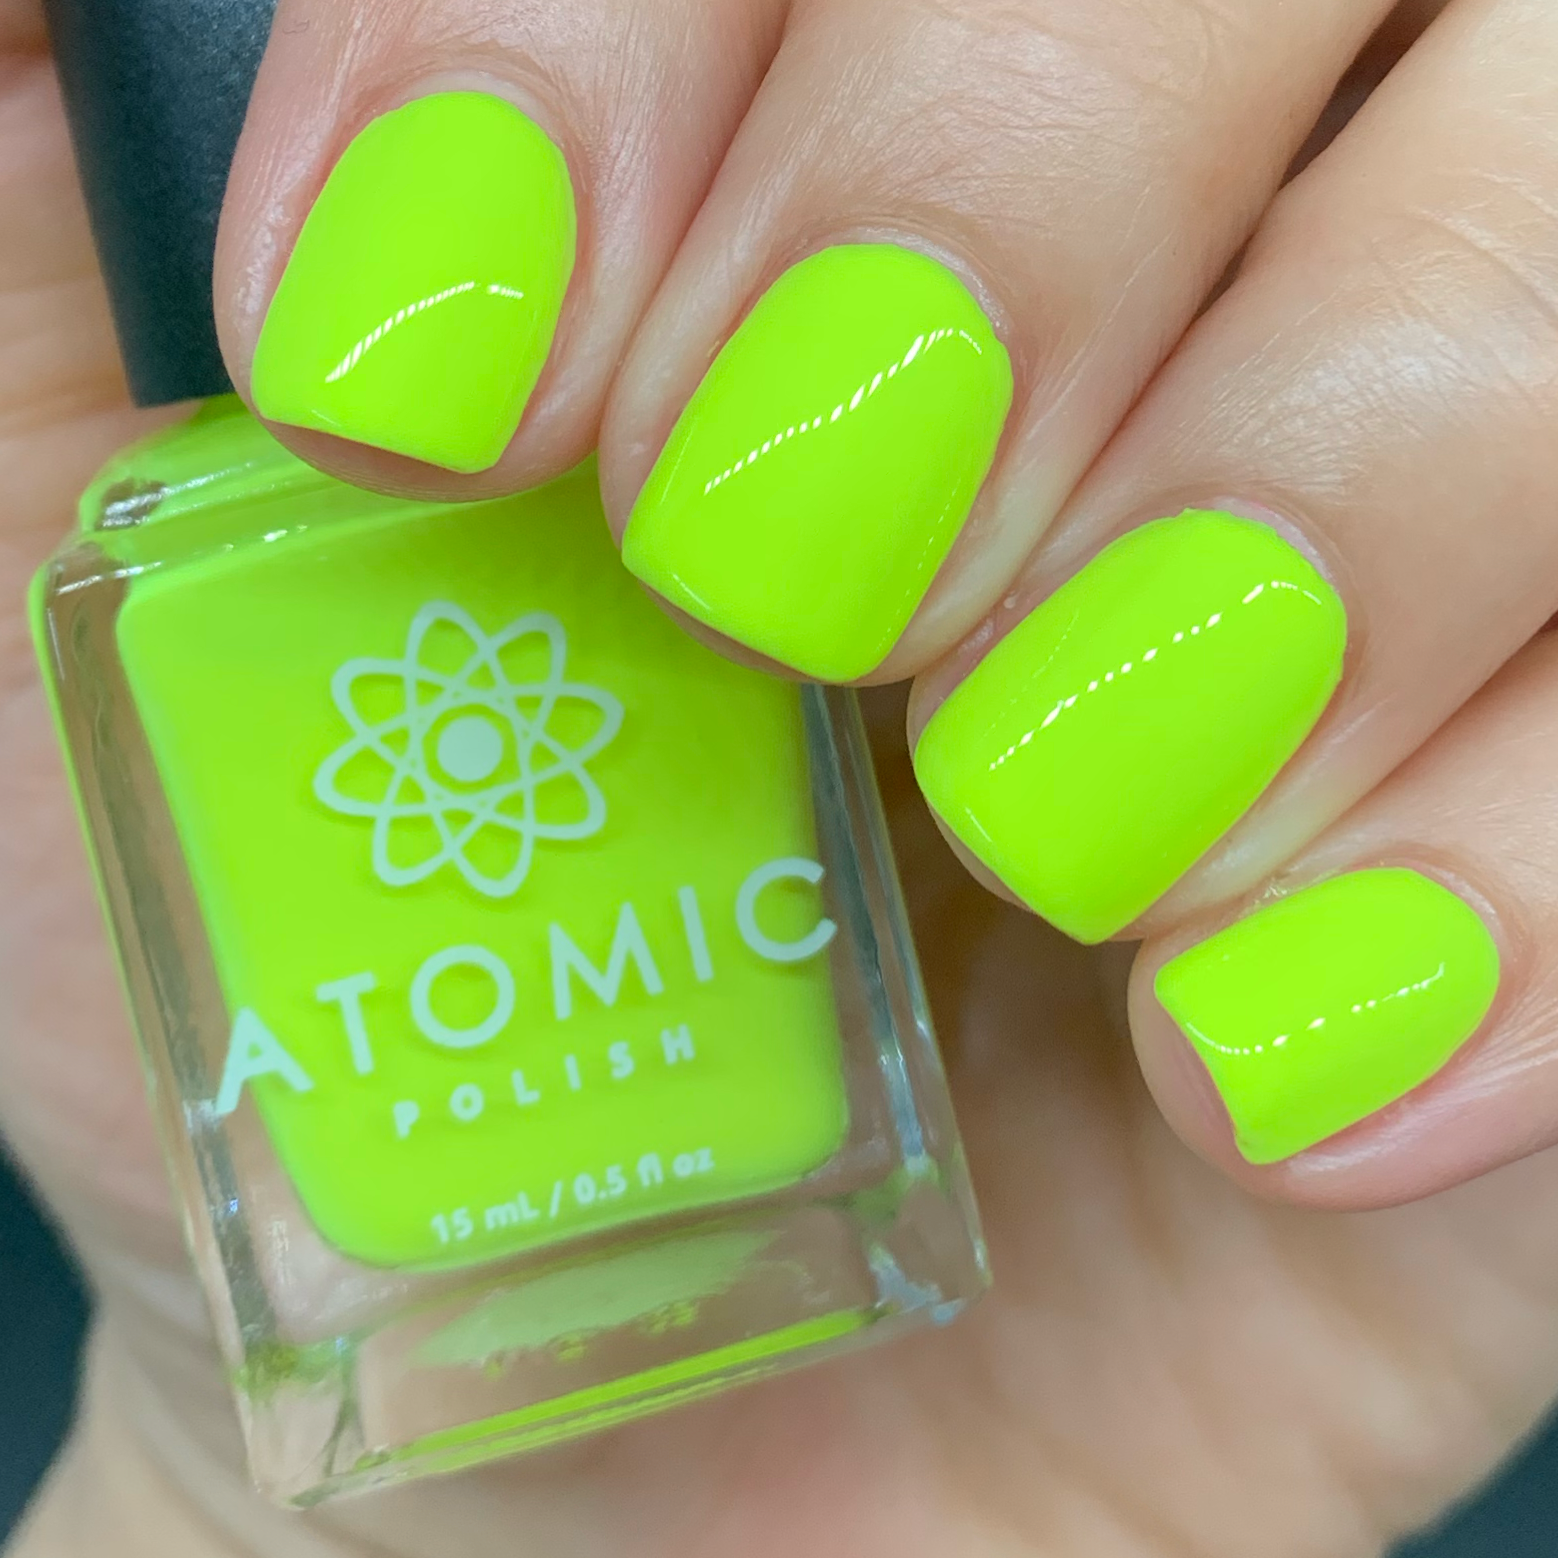 ALL YOU NEED TO KNOW ABOUT NEON NAIL DESIGNS